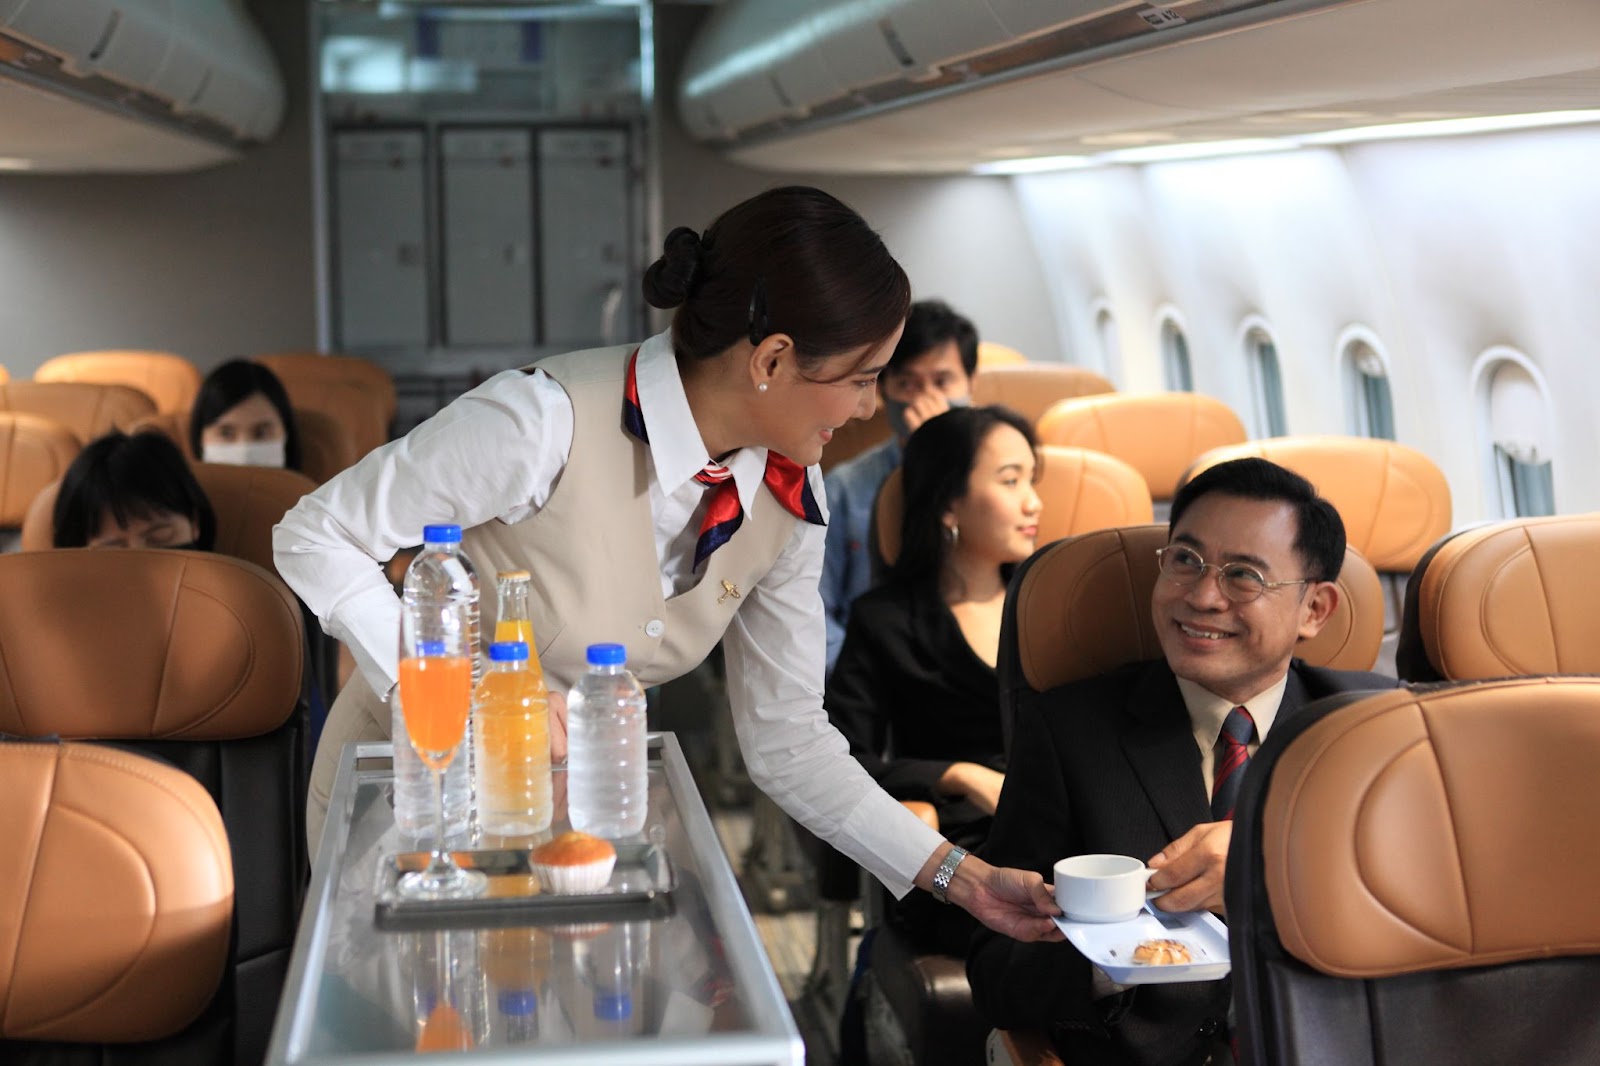 Cabin crew pushing service cart and serve to customer on the airplane during flight.